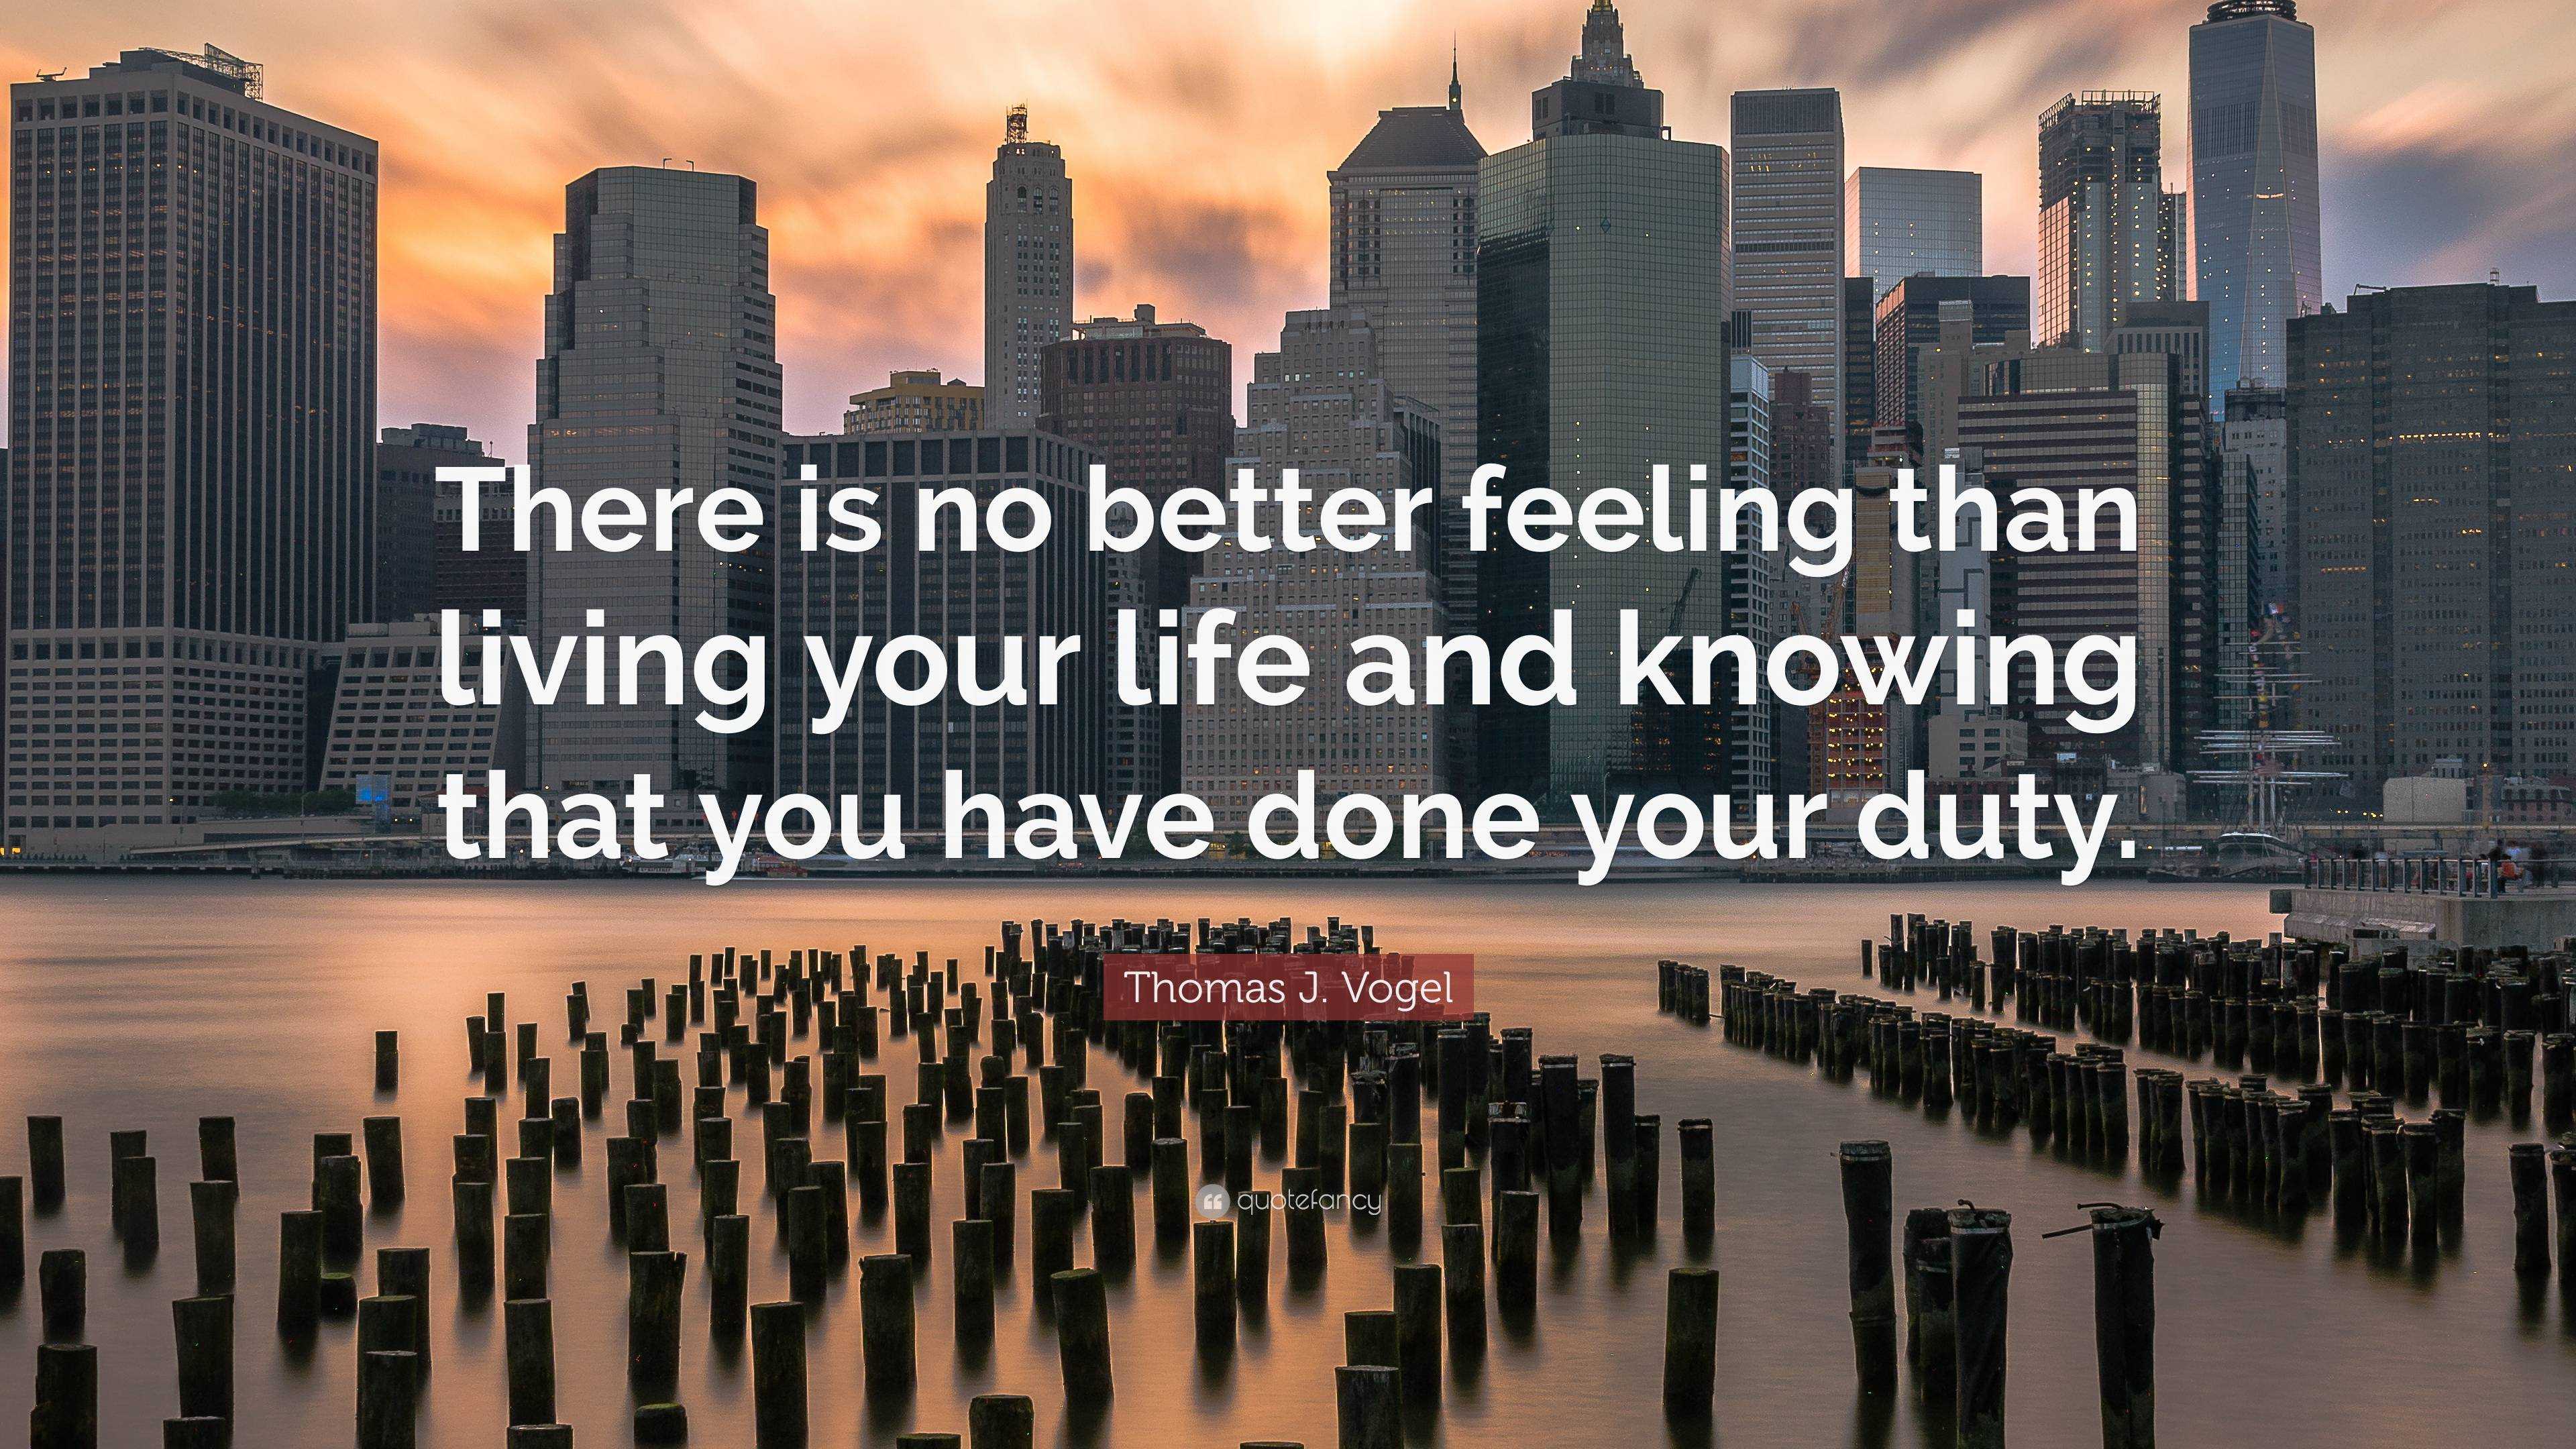 Thomas J. Vogel Quote: “There is no better feeling than living your life  and knowing that